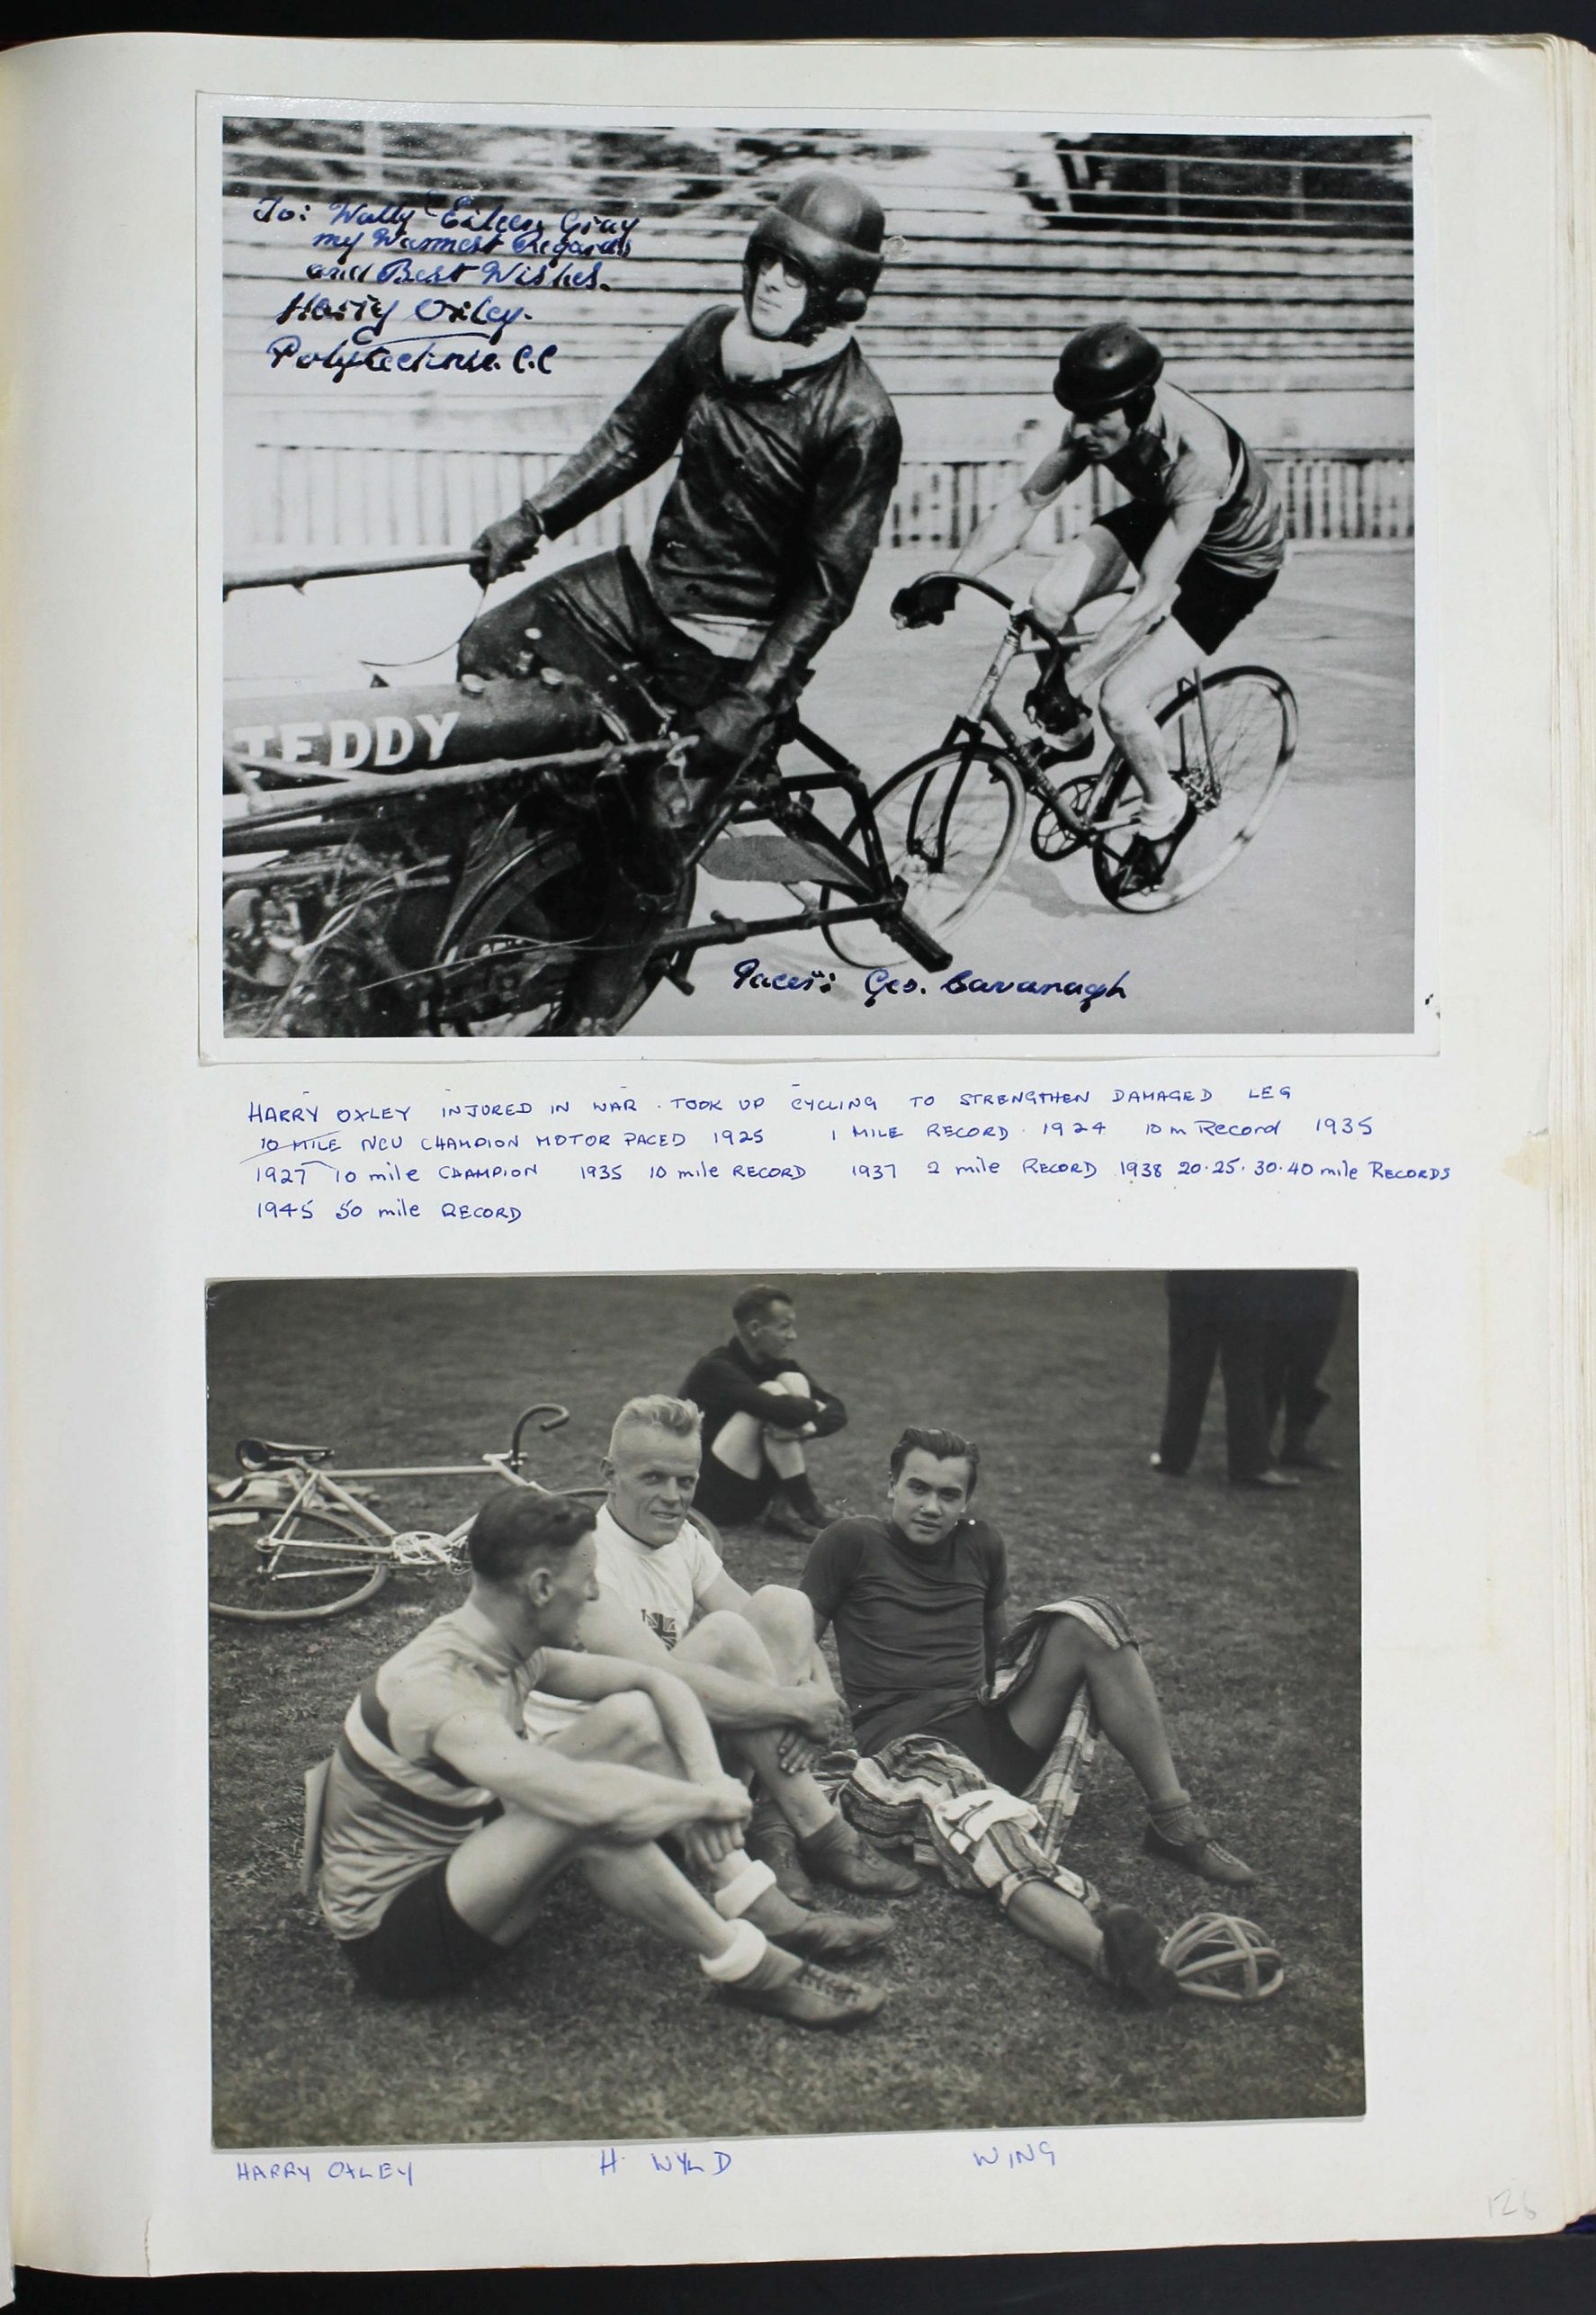 A page from the Polytechnic Cycling Club scrapbook, the page contains two captioned photographs. The first depicts a cyclist in cycling clothes following a pacing motorcyclist wearing leathers and helmet. Manuscript text written on the photograph reads: ‘To: Wally & Eileen Gray my Warmest Regards and Best Wishes. Harry Oxley. Polytechnic C.C’ and ‘Pacer: Geo. Cavanagh’ The photograph is captioned: HARRY OXLEY INJURED IN WAR. TOOK UP CYCLING TO STRENGTHEN DAMAGED LEG. 10 MILE [CROSSED OUT] NEU CHAMPTION MOTOR PACED 1925. 1 MILE RECORD 1924. 10 M RECORD 1935. 1927 10 MILE CHAMPION. 1935 10 MILE RECORD. 1937 2 MILE RECORD. 1938 20,25,30,40 MILE RECORDS. 1945 50 MILE RECORD The photograph below depicts three men in cycling clothes sitting on grass. A bicycling is visible on the floor in the background along with another seated man. The photograph is captioned: HARRY OXLEY. H WYLD. WING